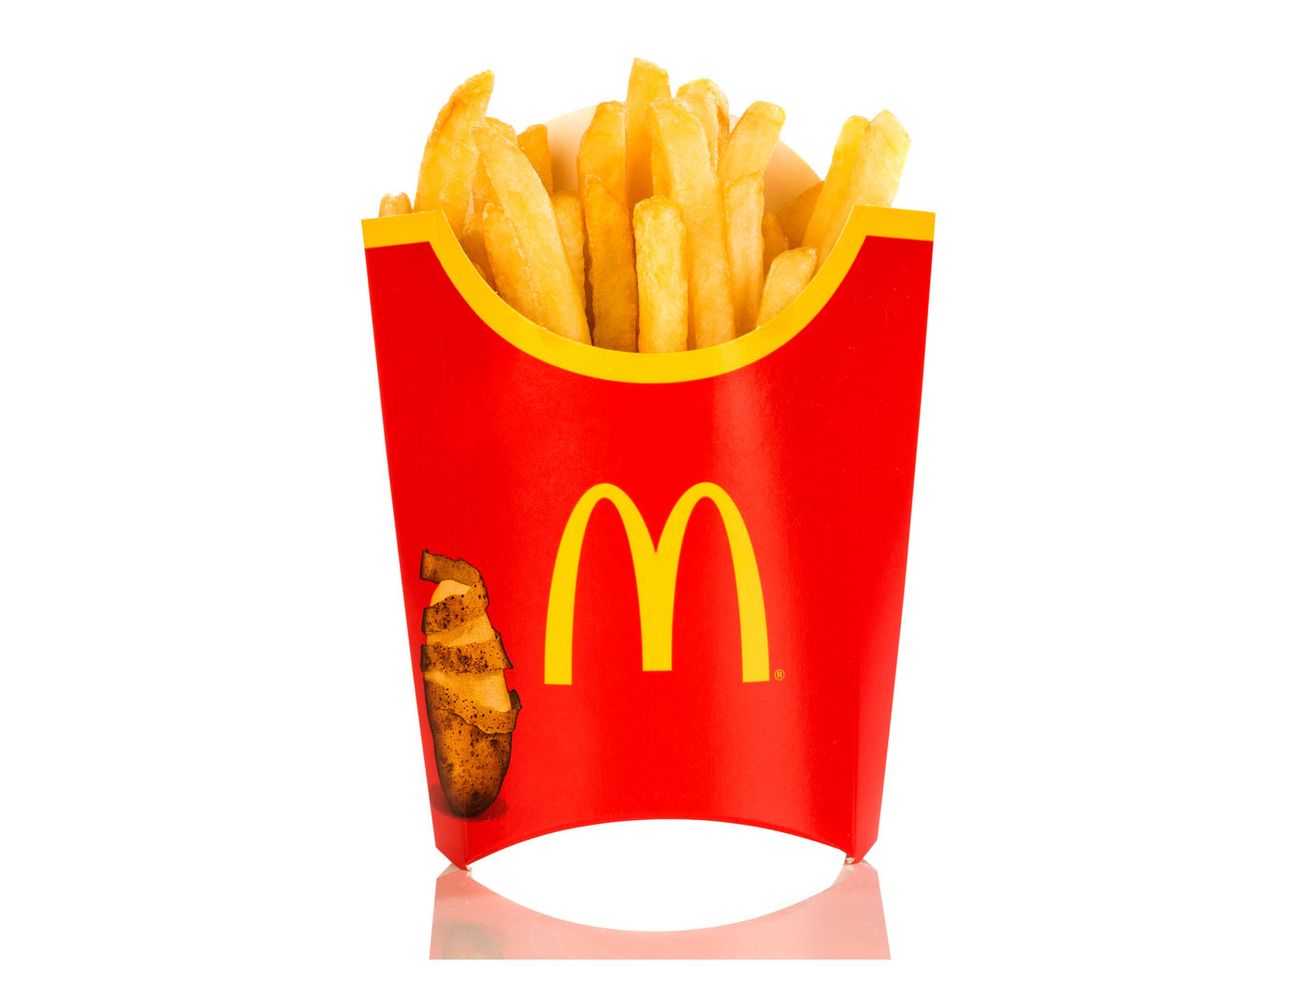 McDonald's U.S. Fries Have Three Times as Many Ingredients as ...